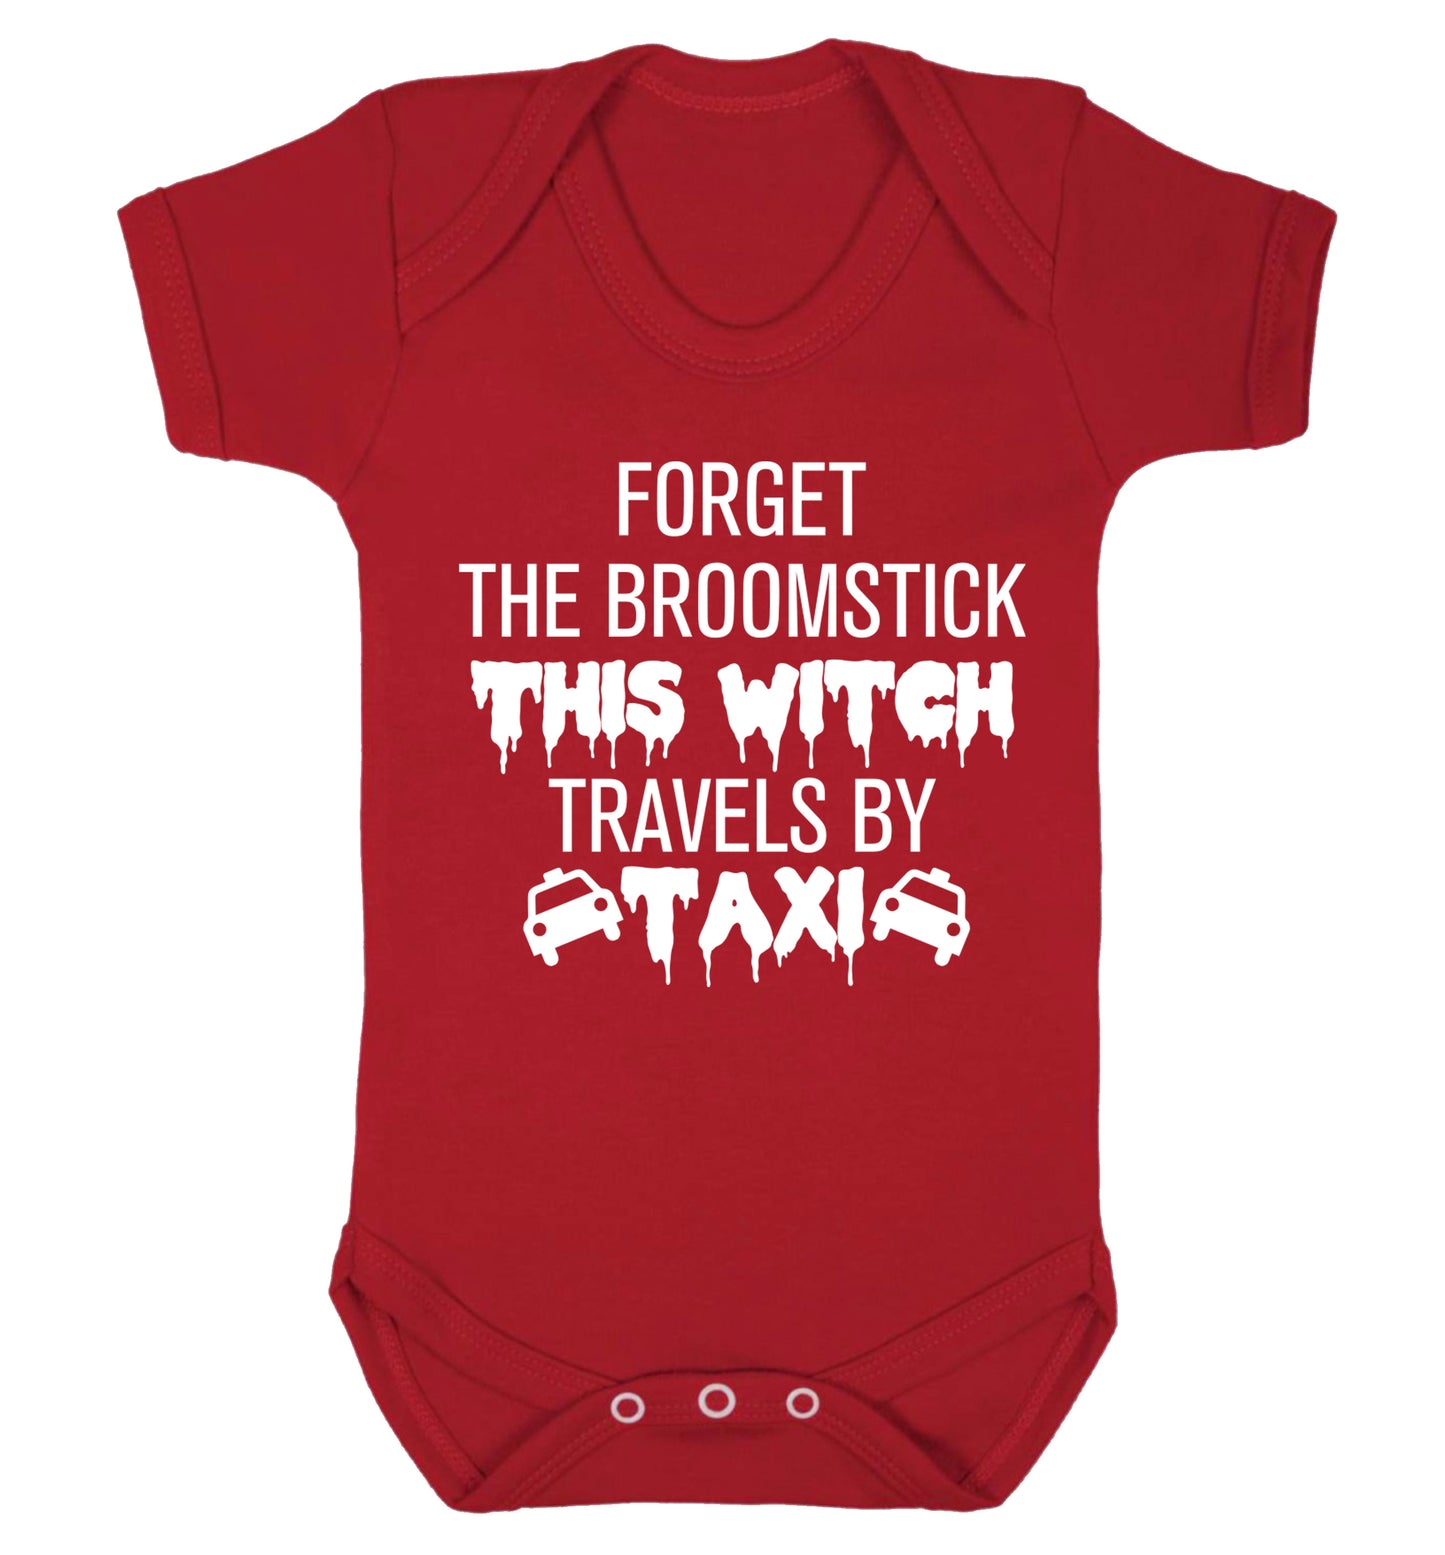 Forget the broomstick this witch travels by taxi Baby Vest red 18-24 months